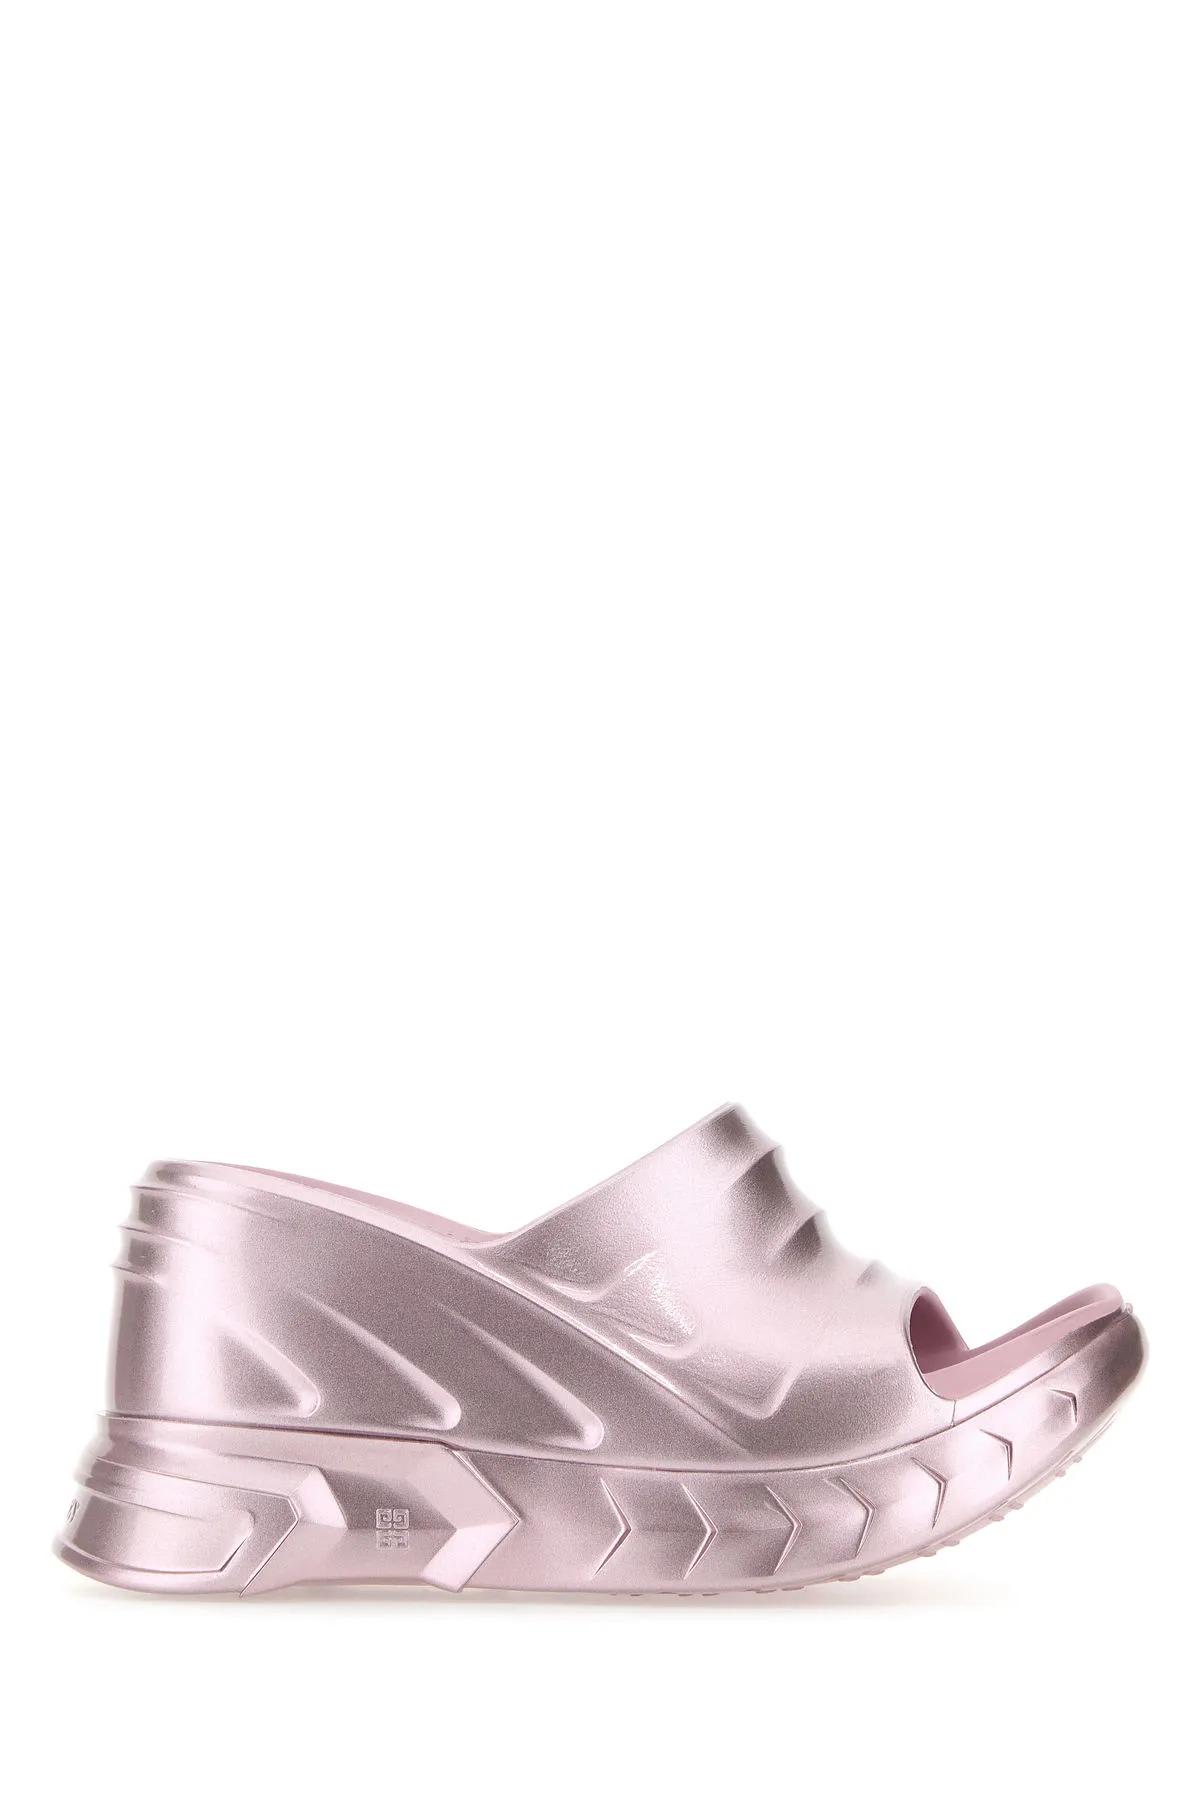 Shop Givenchy Pink Rubber Marshmallow Mules